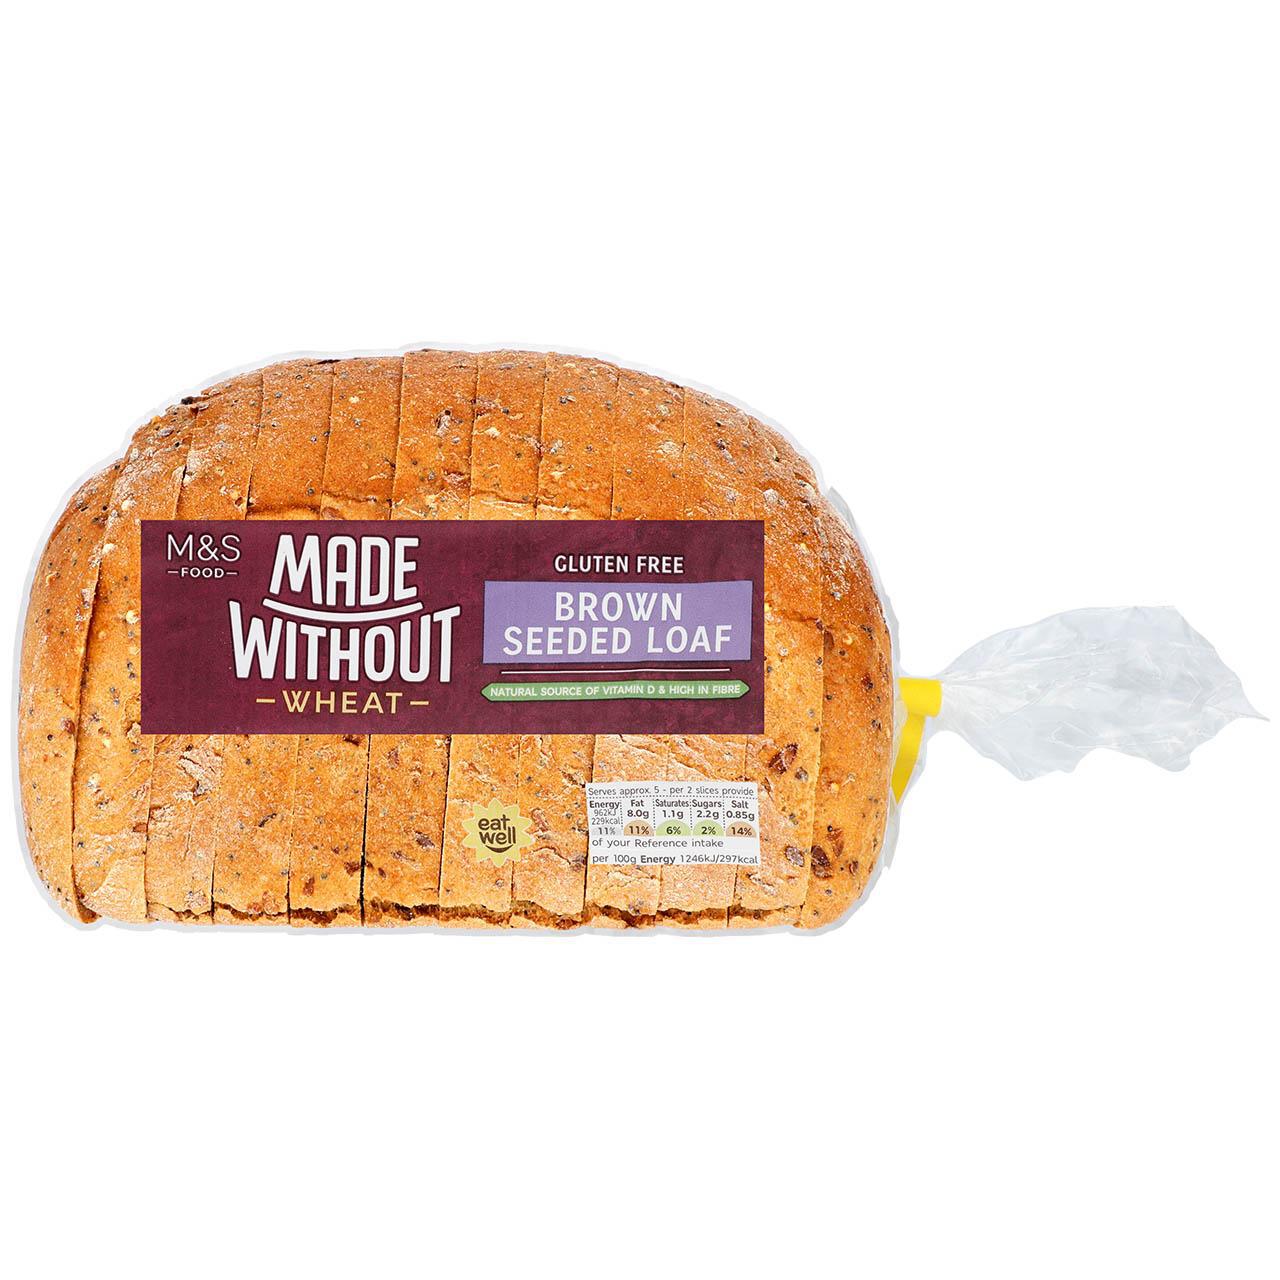 M&S Made Without Brown Seeded Bread Loaf 400g